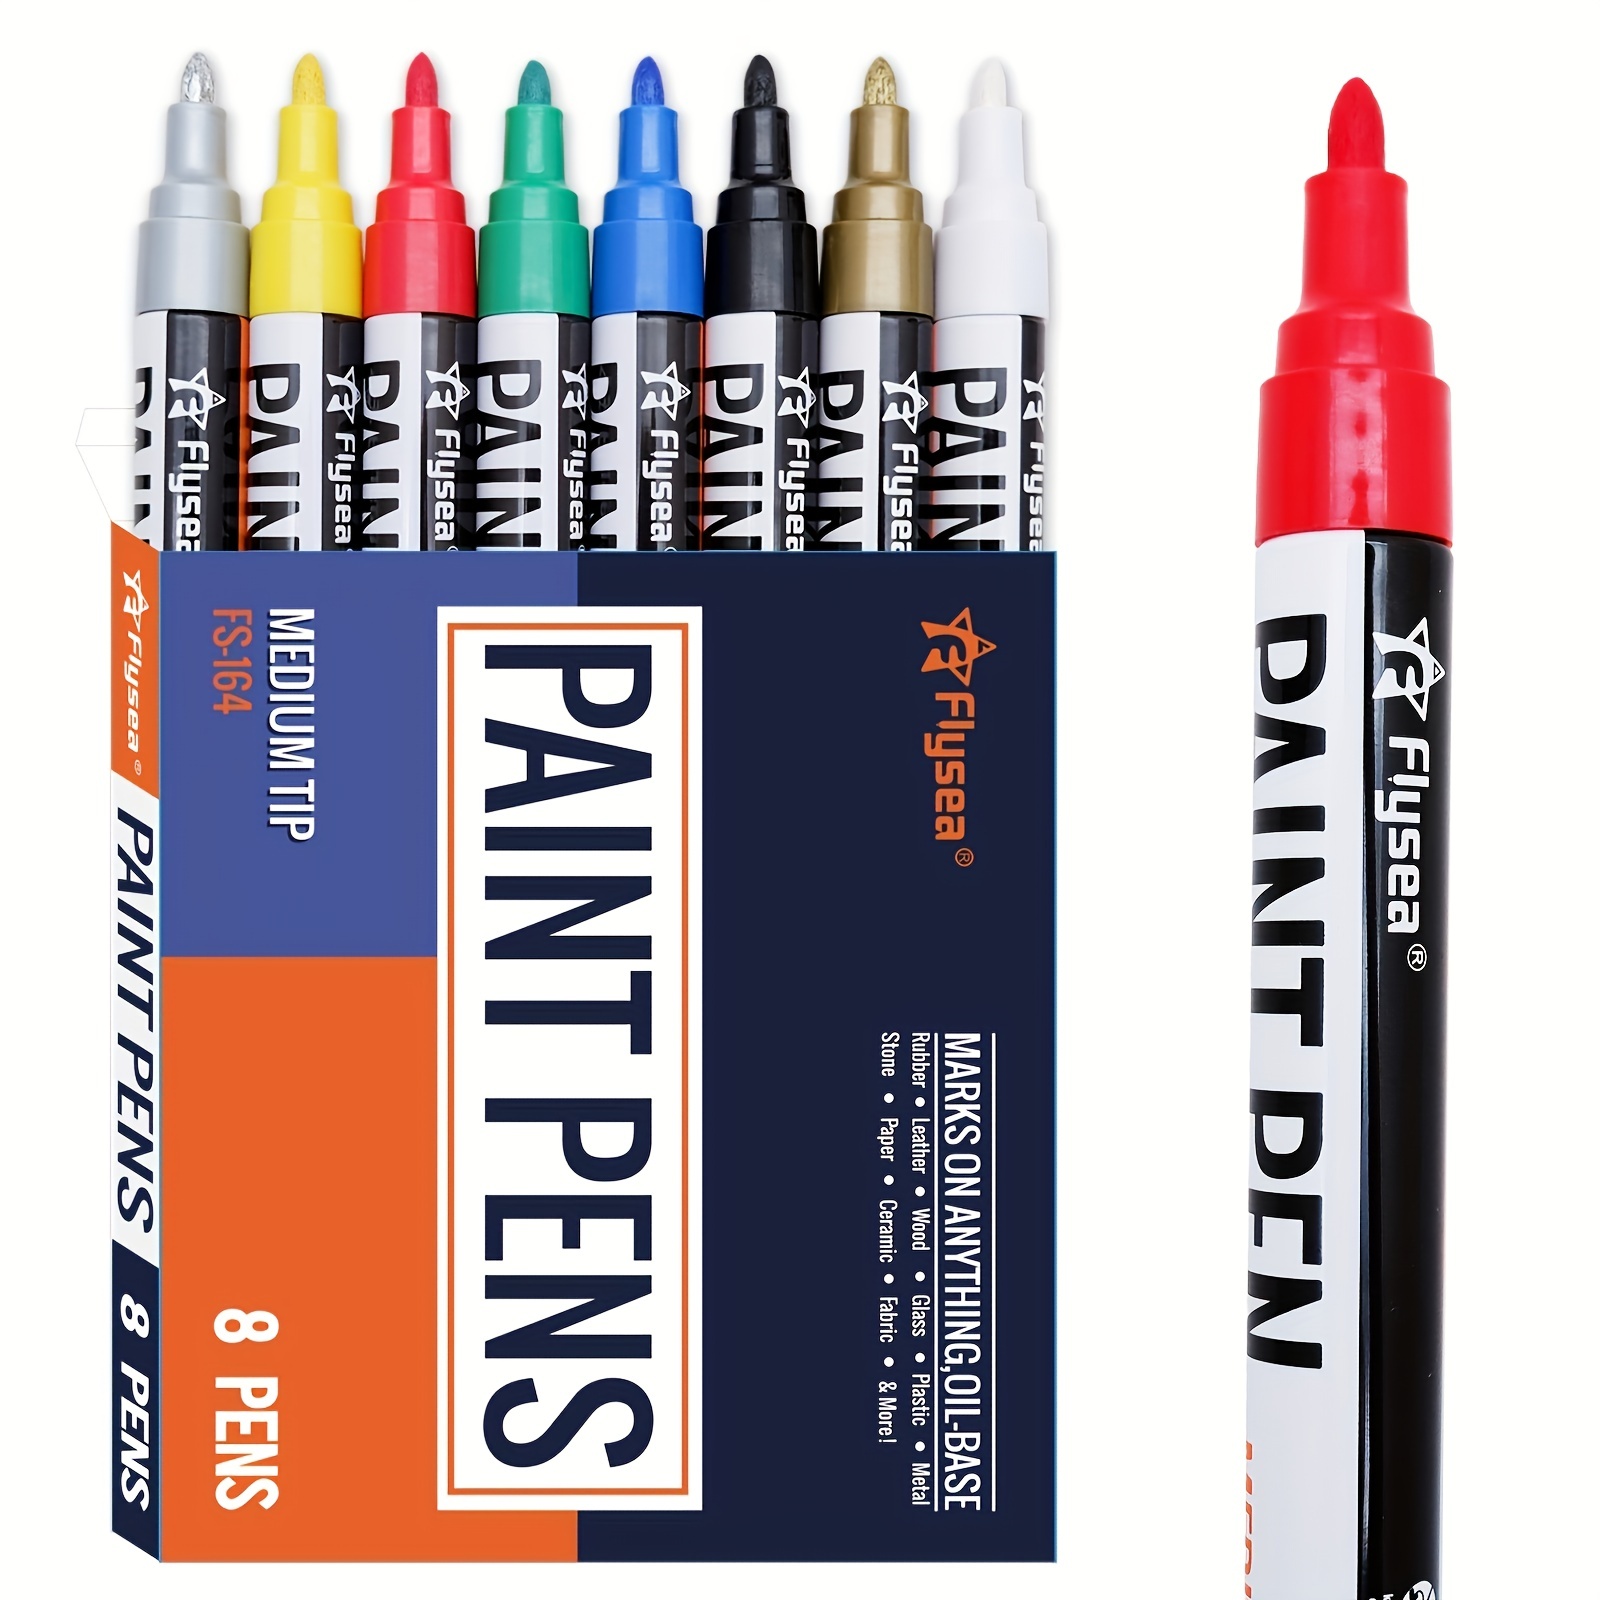 Tooli-Art Metallic Acrylic Paint Pens Marker Set for Rocks, Glass, Mugs,  and Most Surfaces with 0.7mm Extra Fine And 3.0mm Medium Tip Combo Marker  Set of 24 